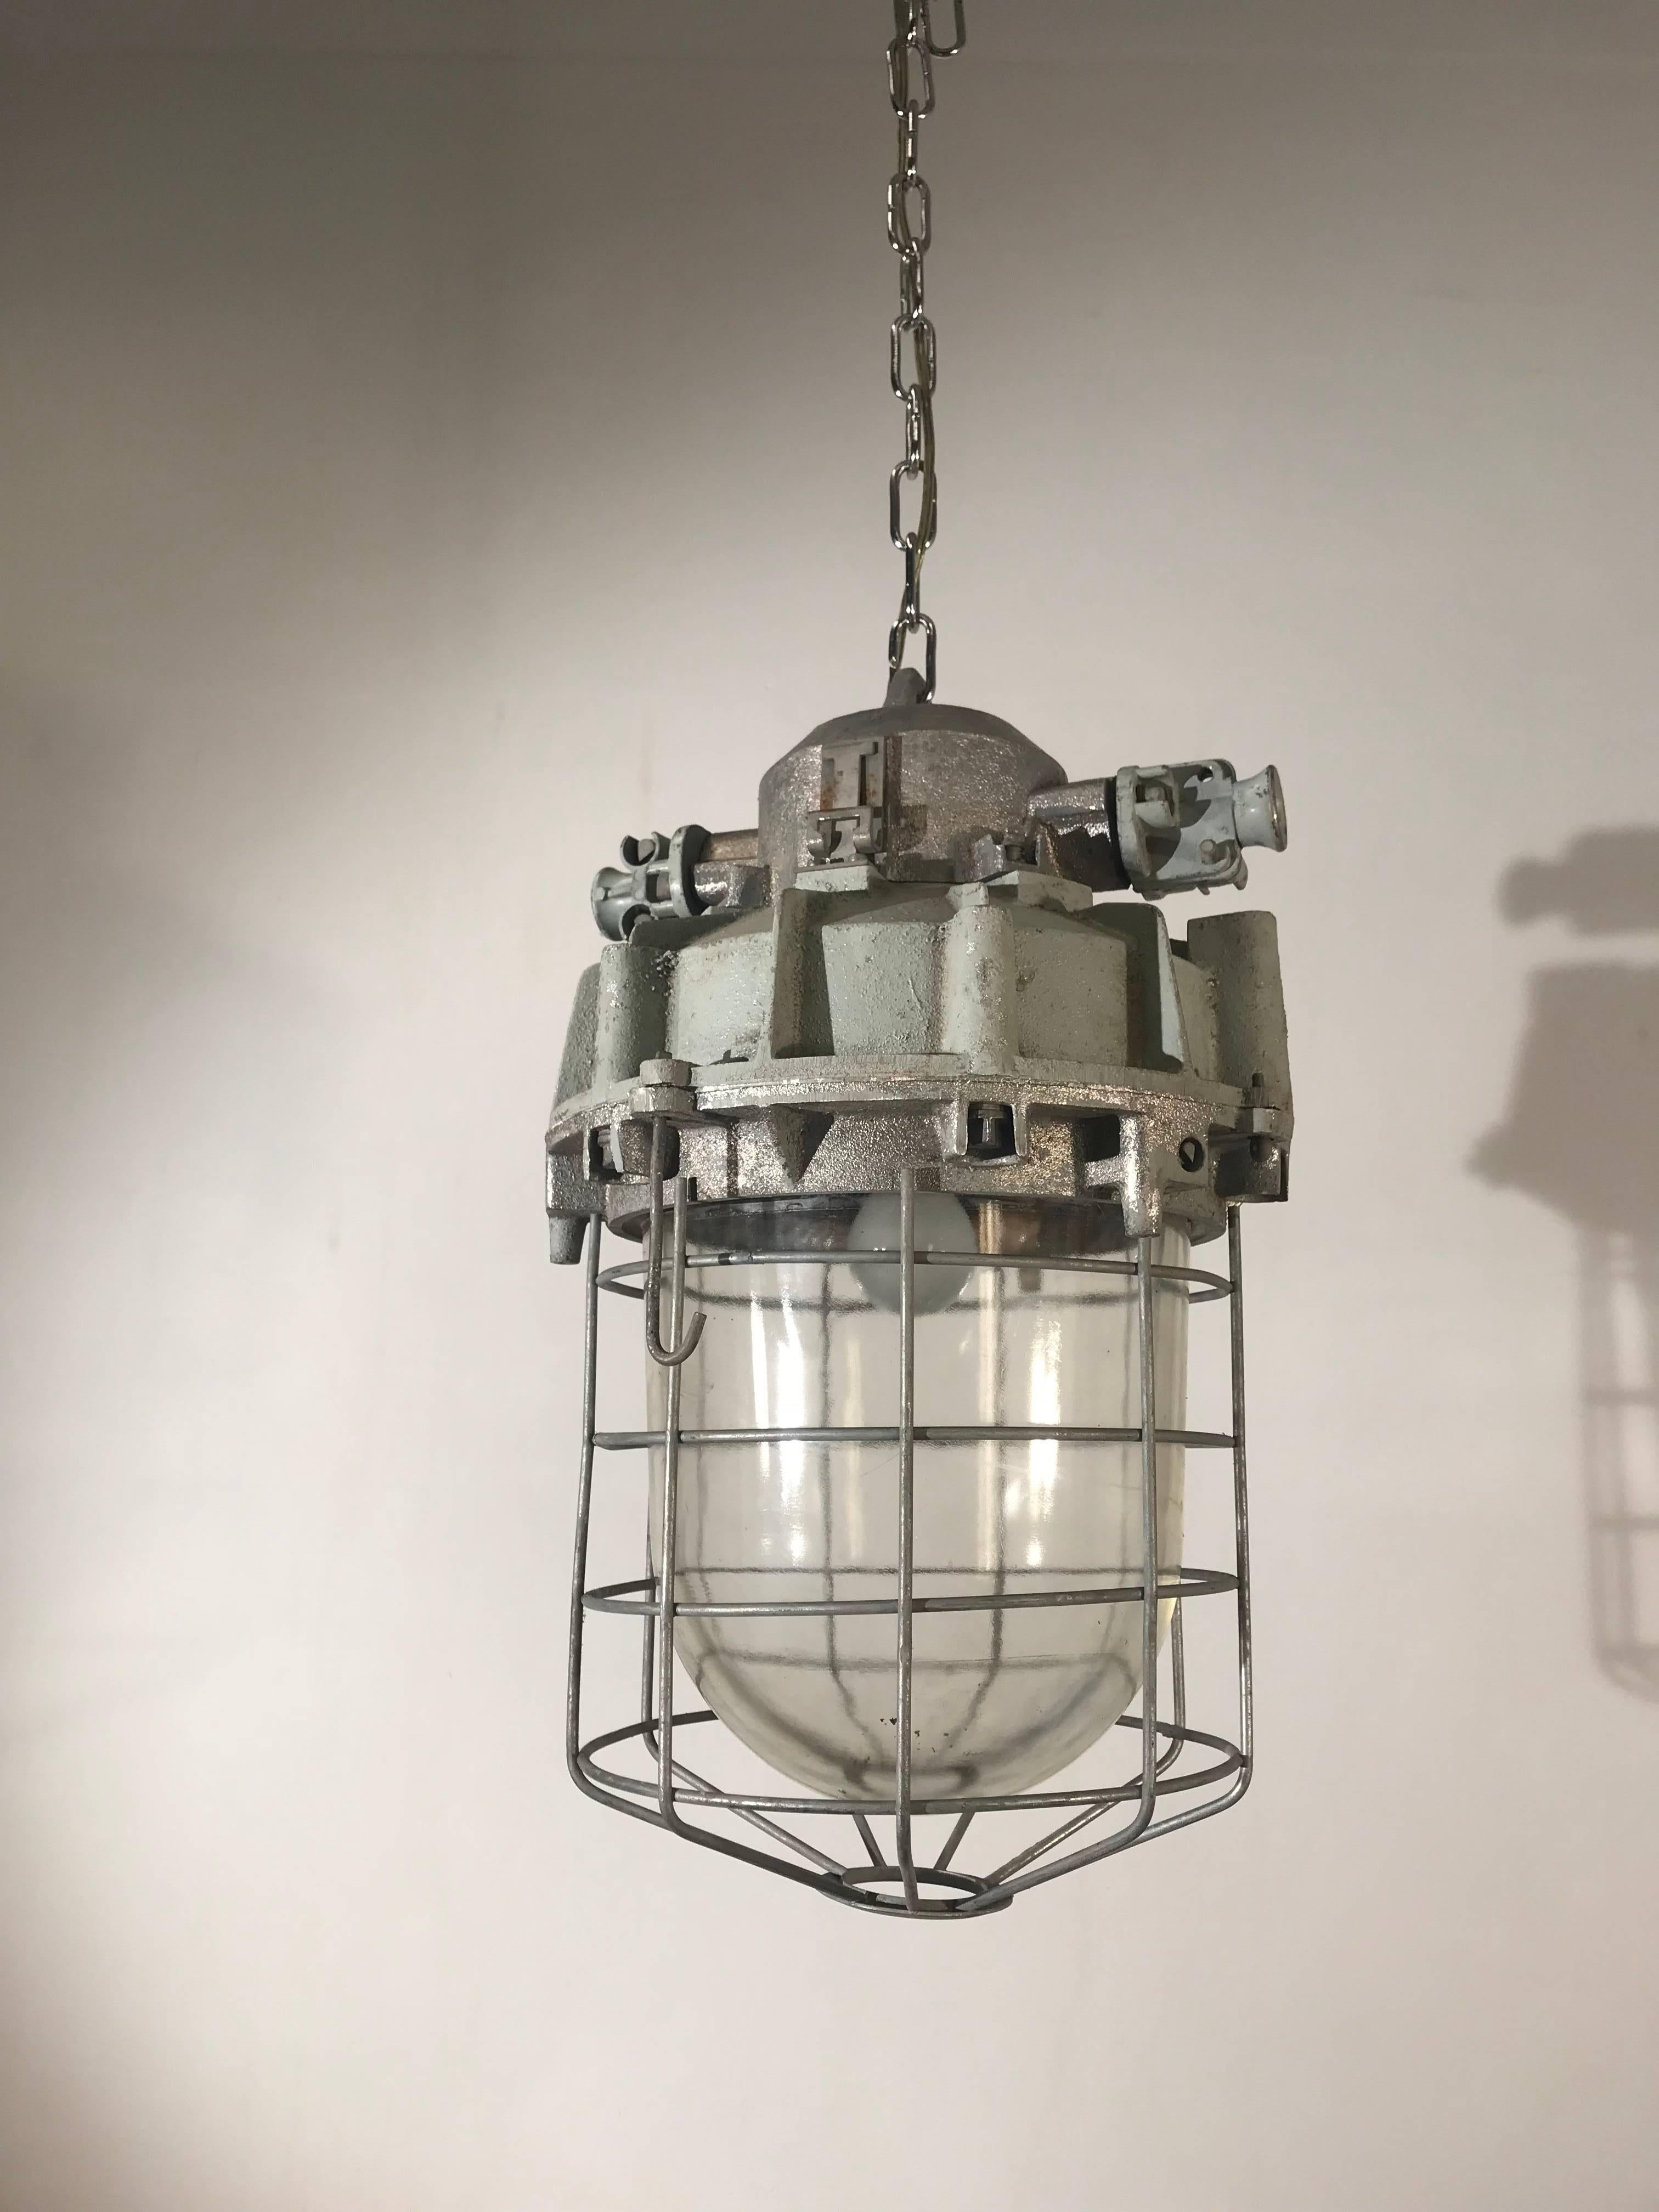 European Large and Decorative 1920s Industrial Iron and Glass Caged Pendant/Light Fixture For Sale